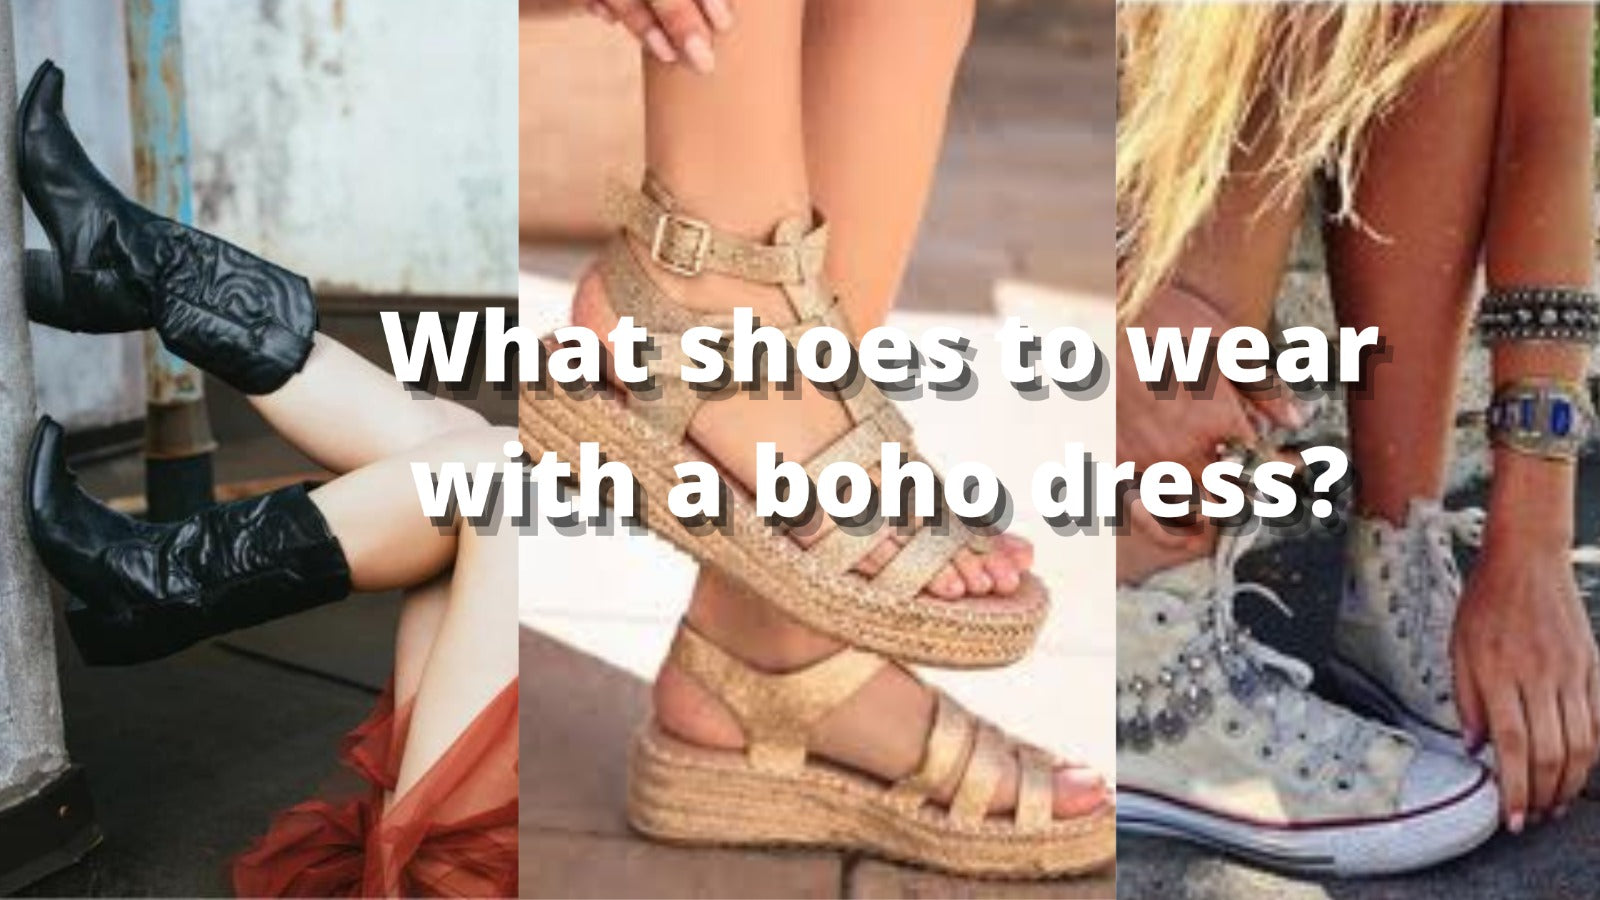 What shoes to wear with a boho dress?